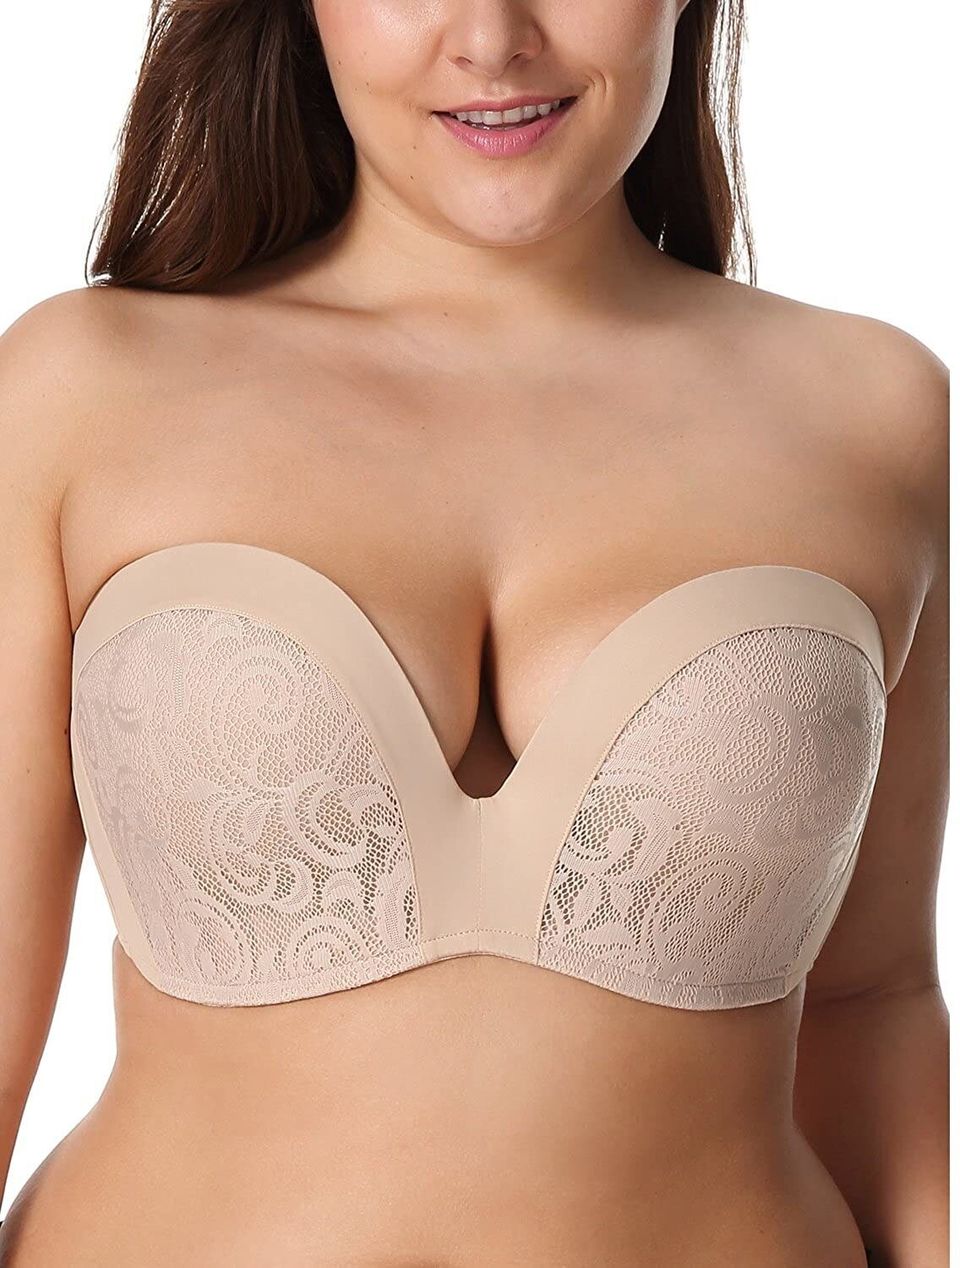 Target Backless Strapless Bra Tan - $10 (50% Off Retail) - From Sarah